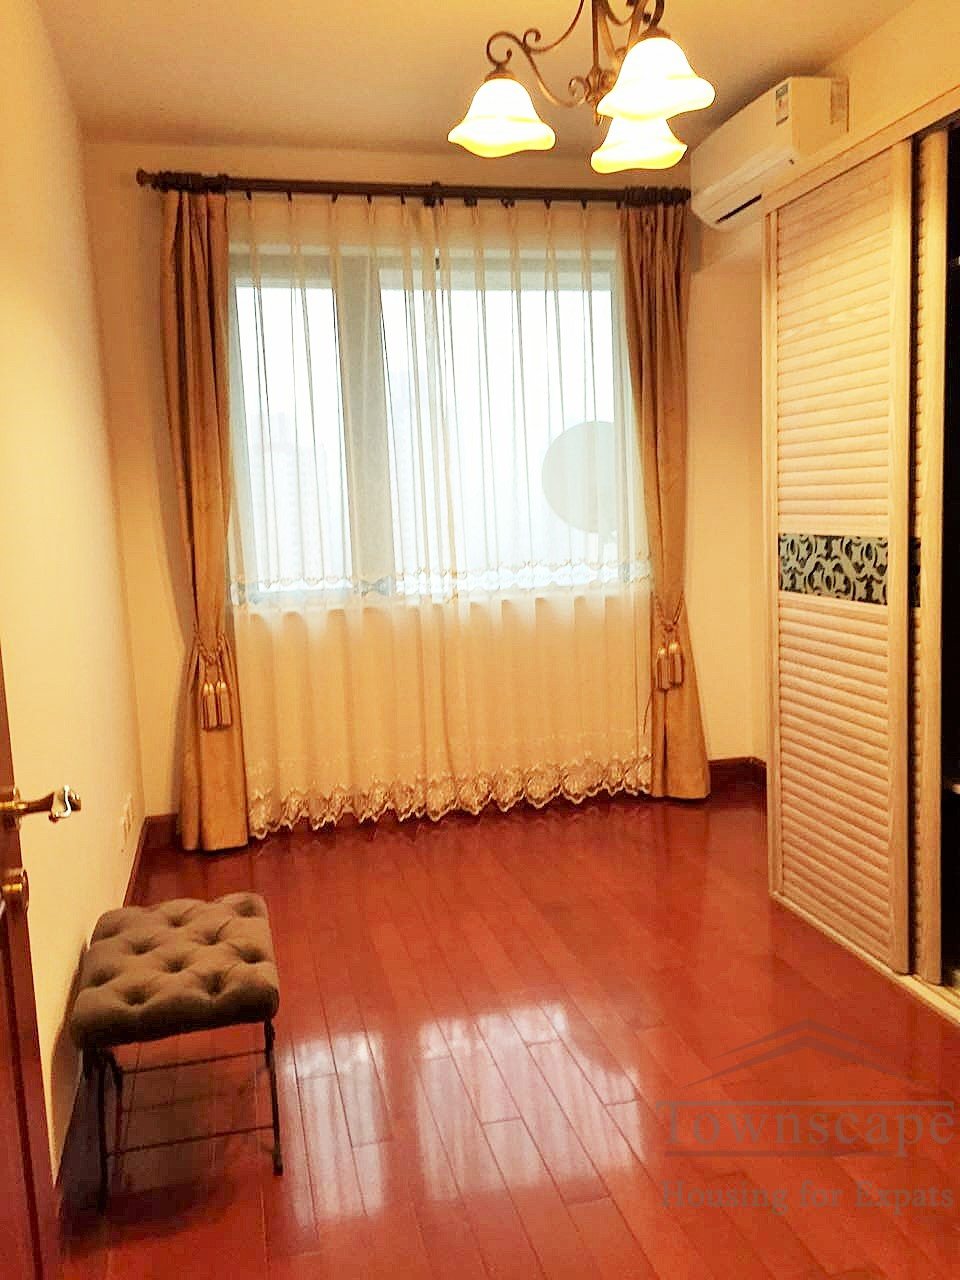  Well priced 3BR Apartment in the Summit on Anfu Road / Wulumuqi Rd